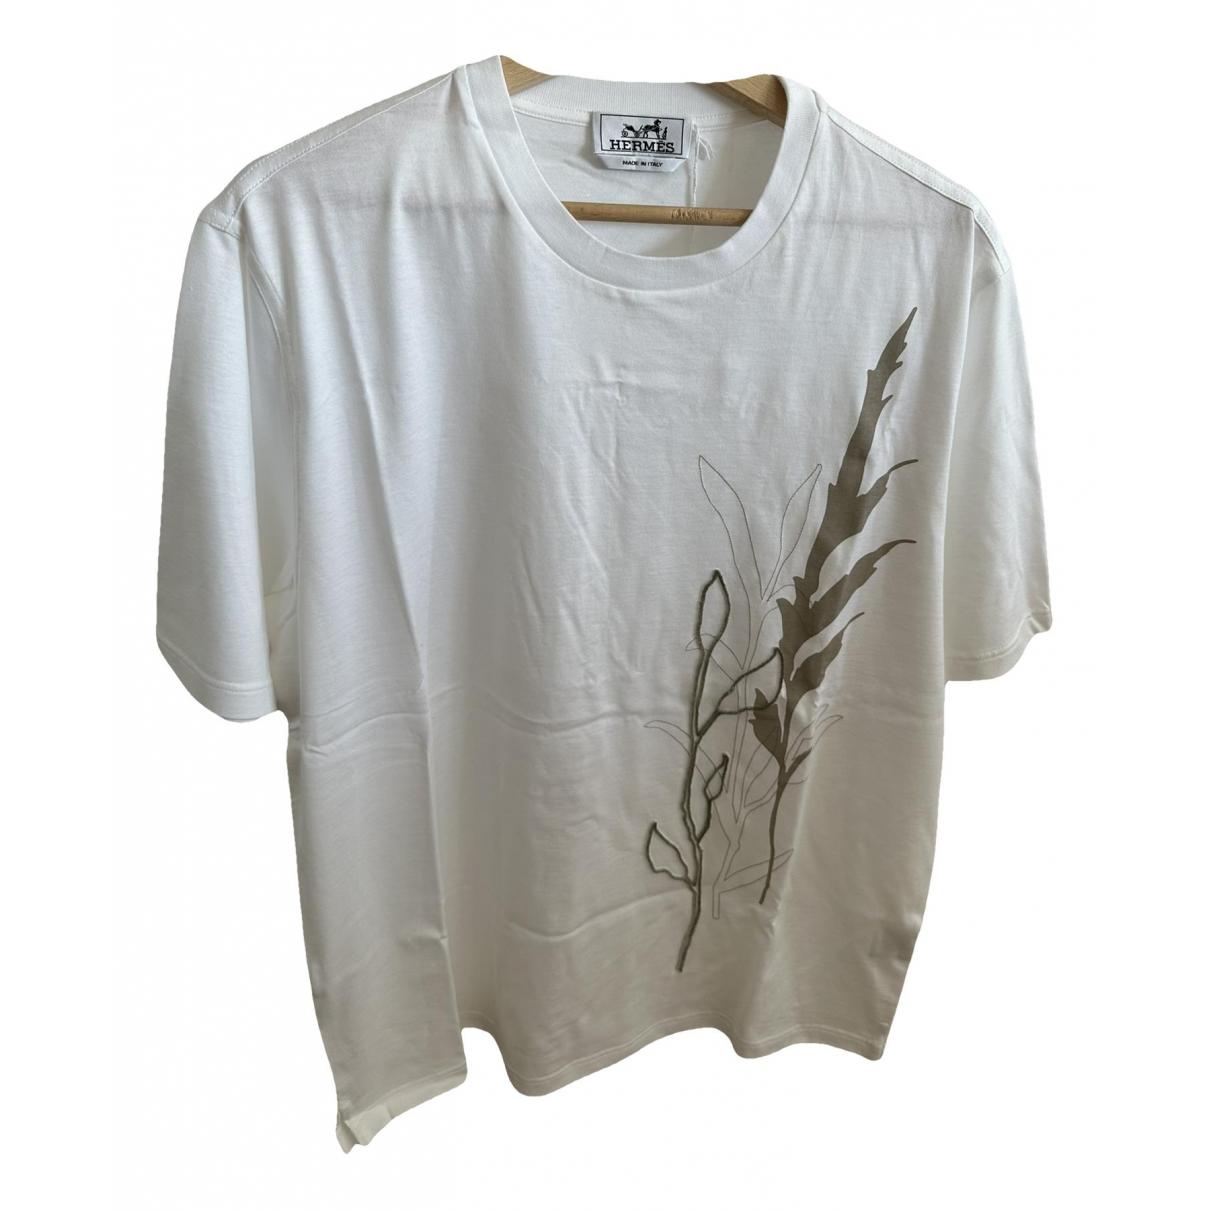 Louis Vuitton King Of Trunk Makers Graphic Print T-Shirt - White T-Shirts,  Clothing - LOU450988